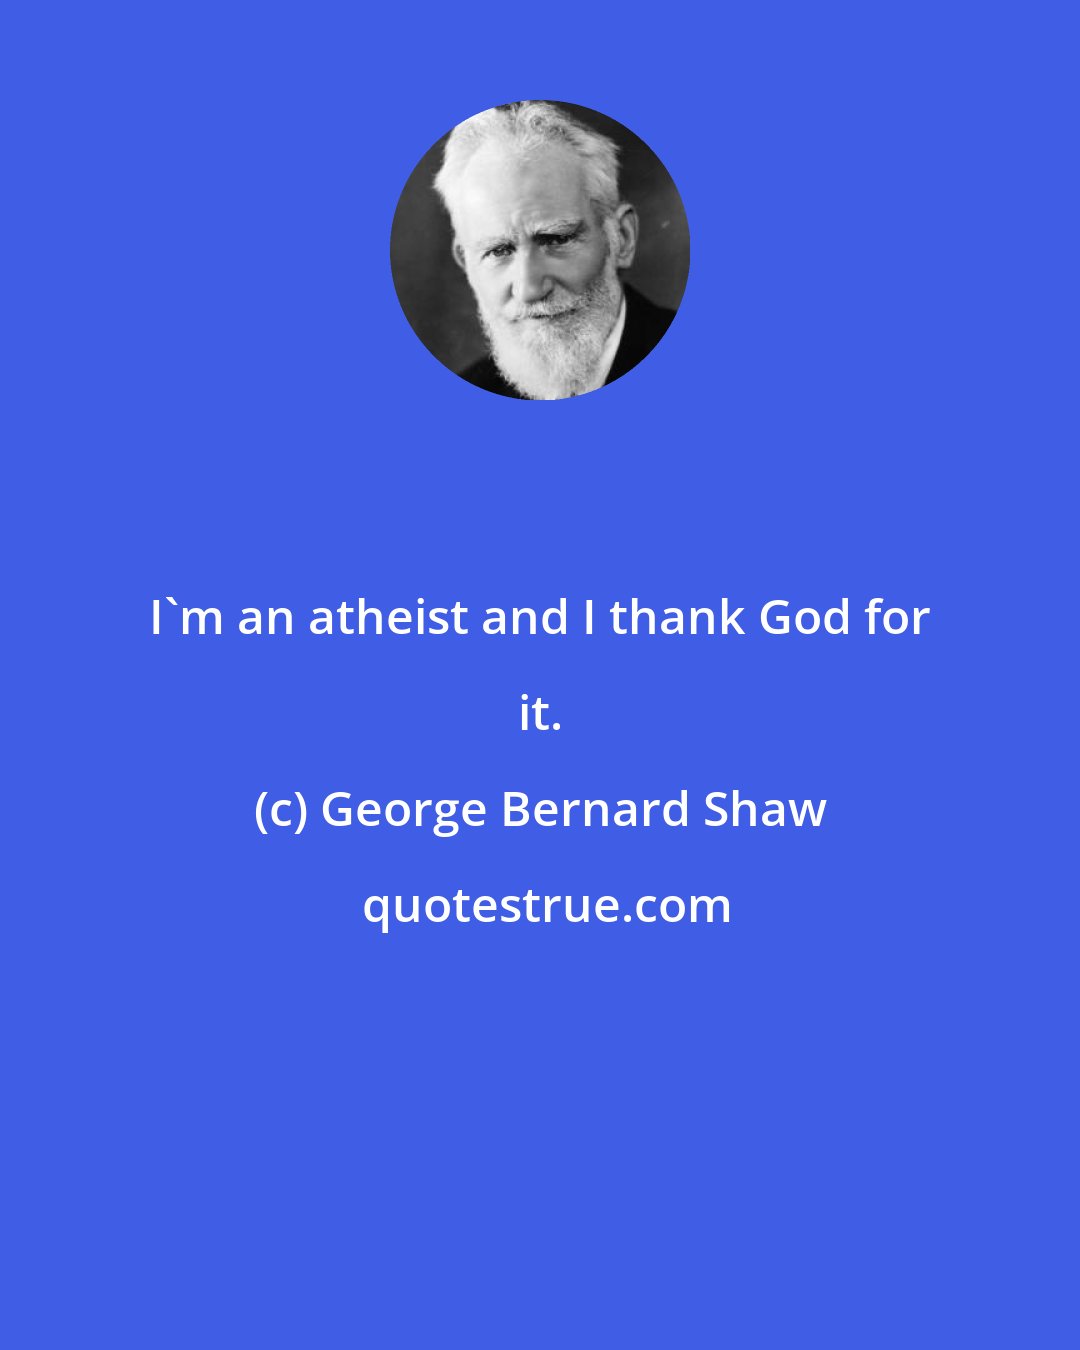 George Bernard Shaw: I'm an atheist and I thank God for it.